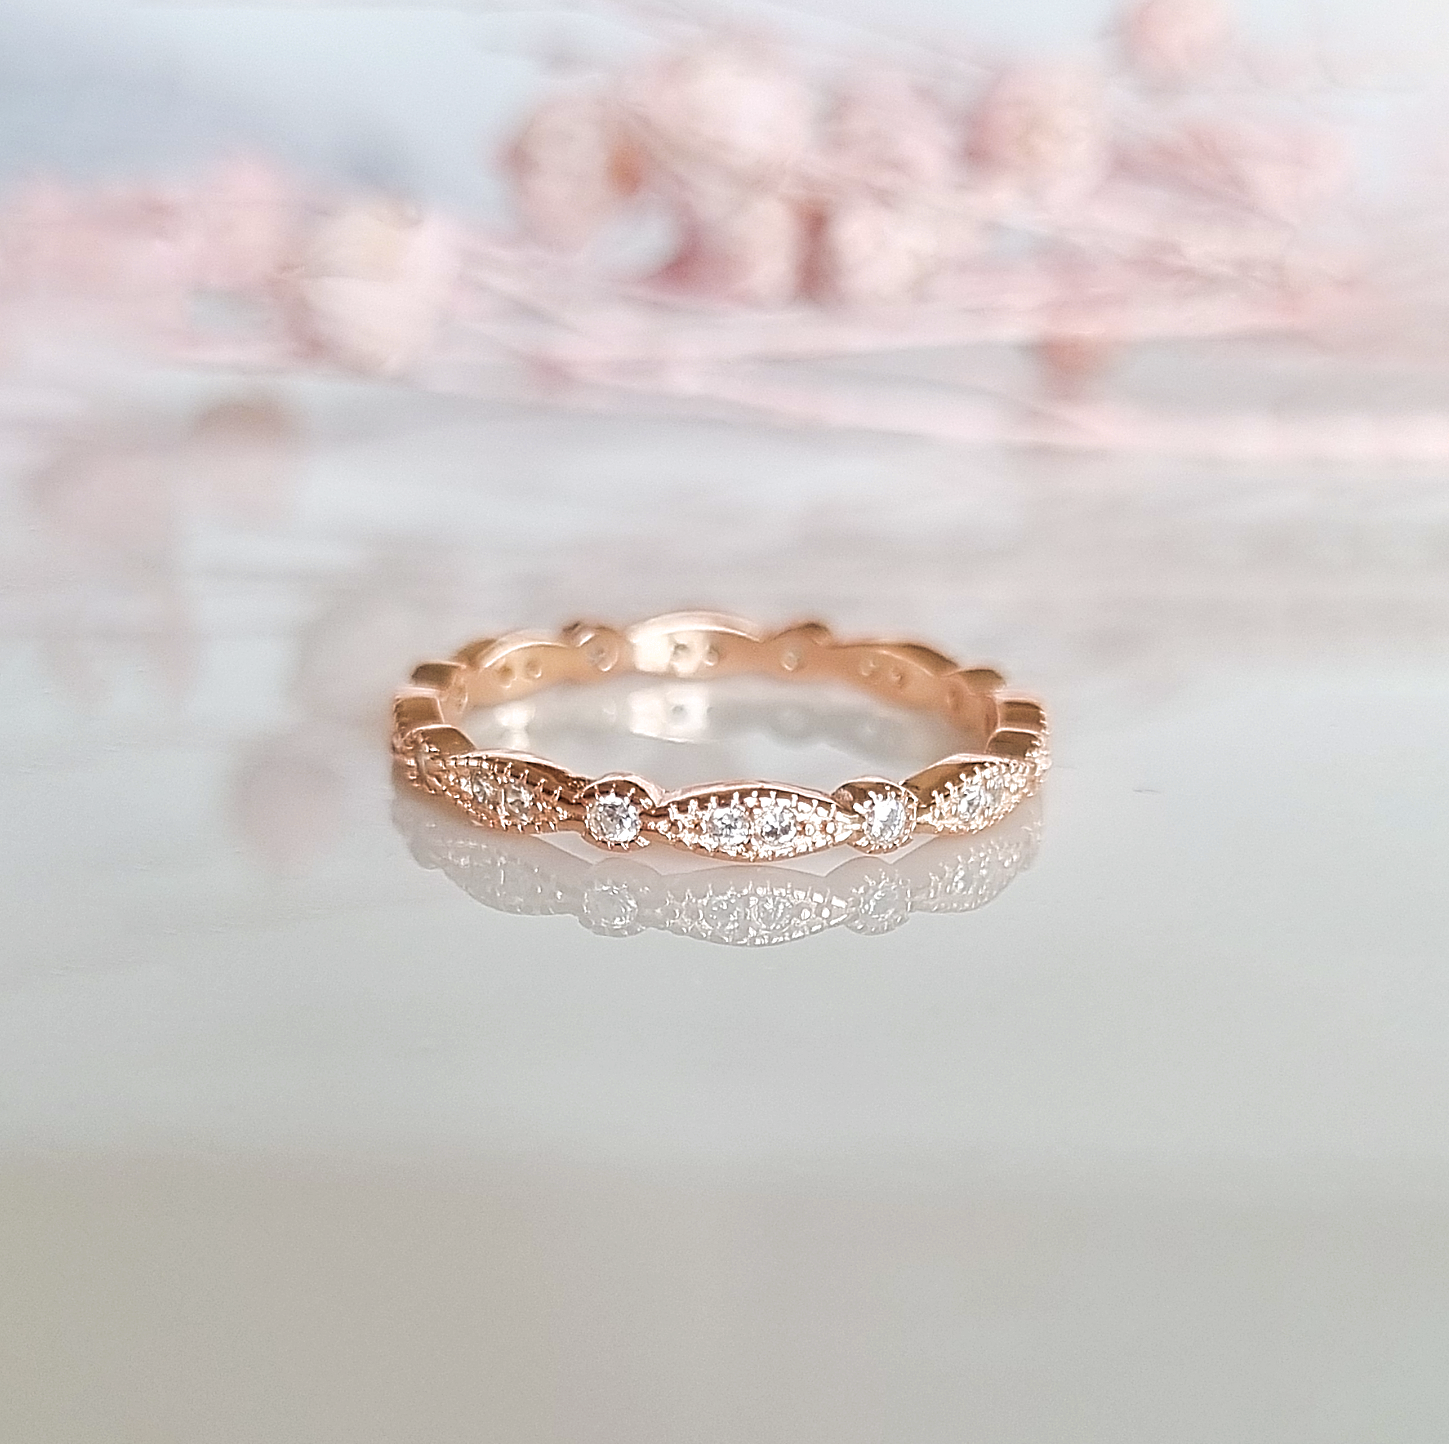 Vintage Style Full Eternity Band in Rose Gold